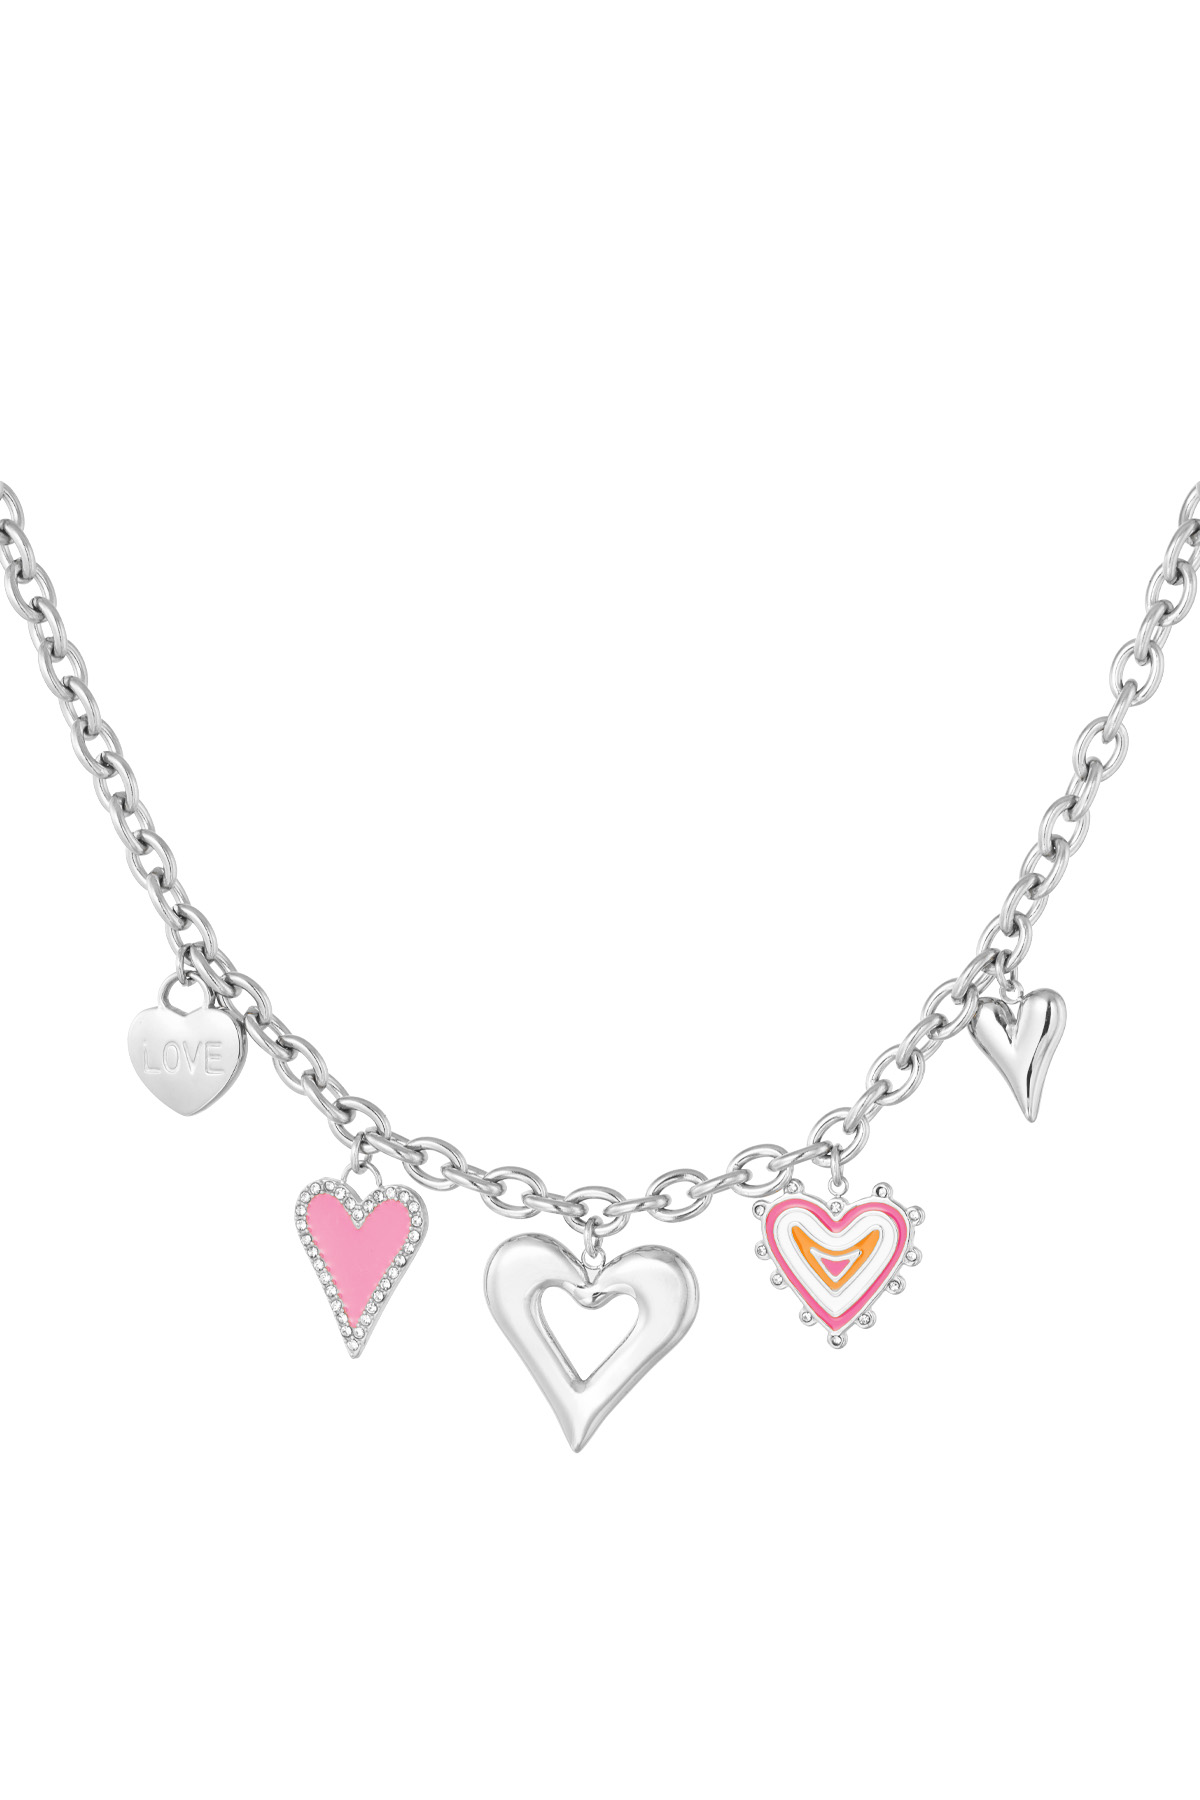 Charm necklace love always wins - silver h5 